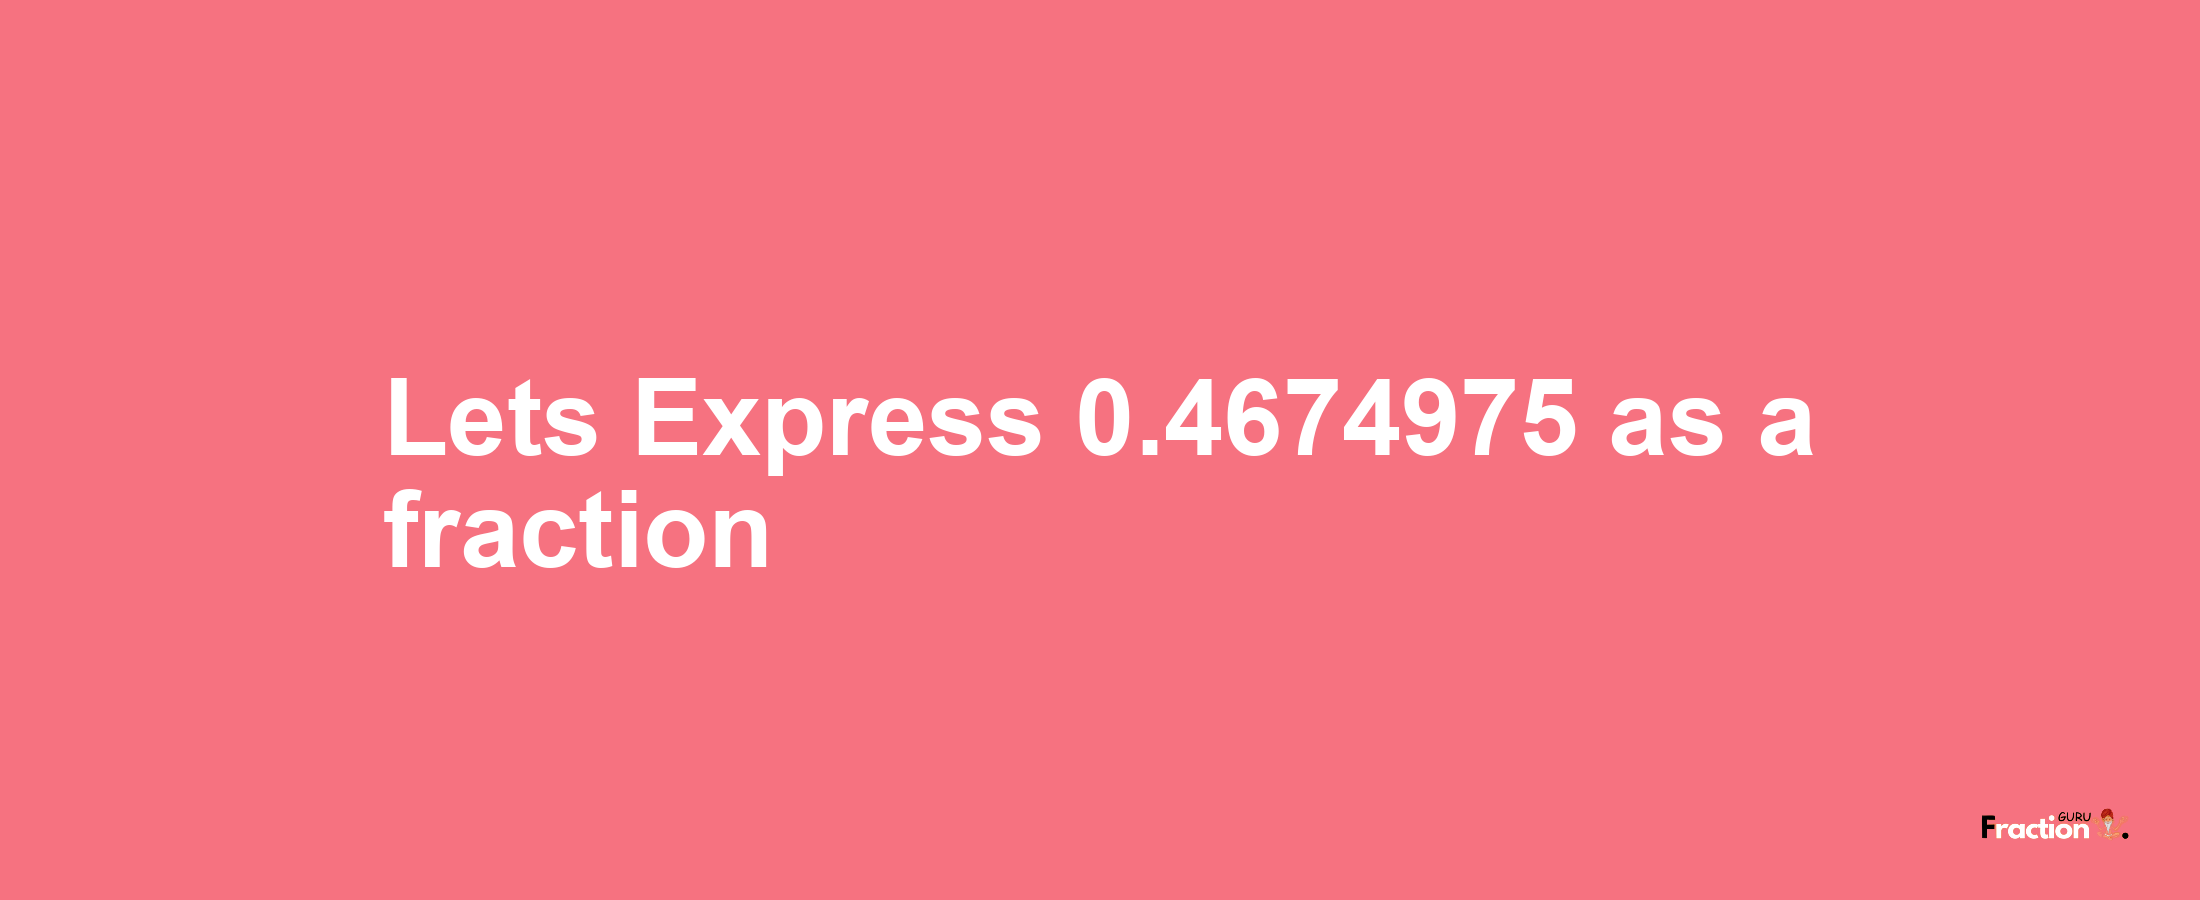 Lets Express 0.4674975 as afraction